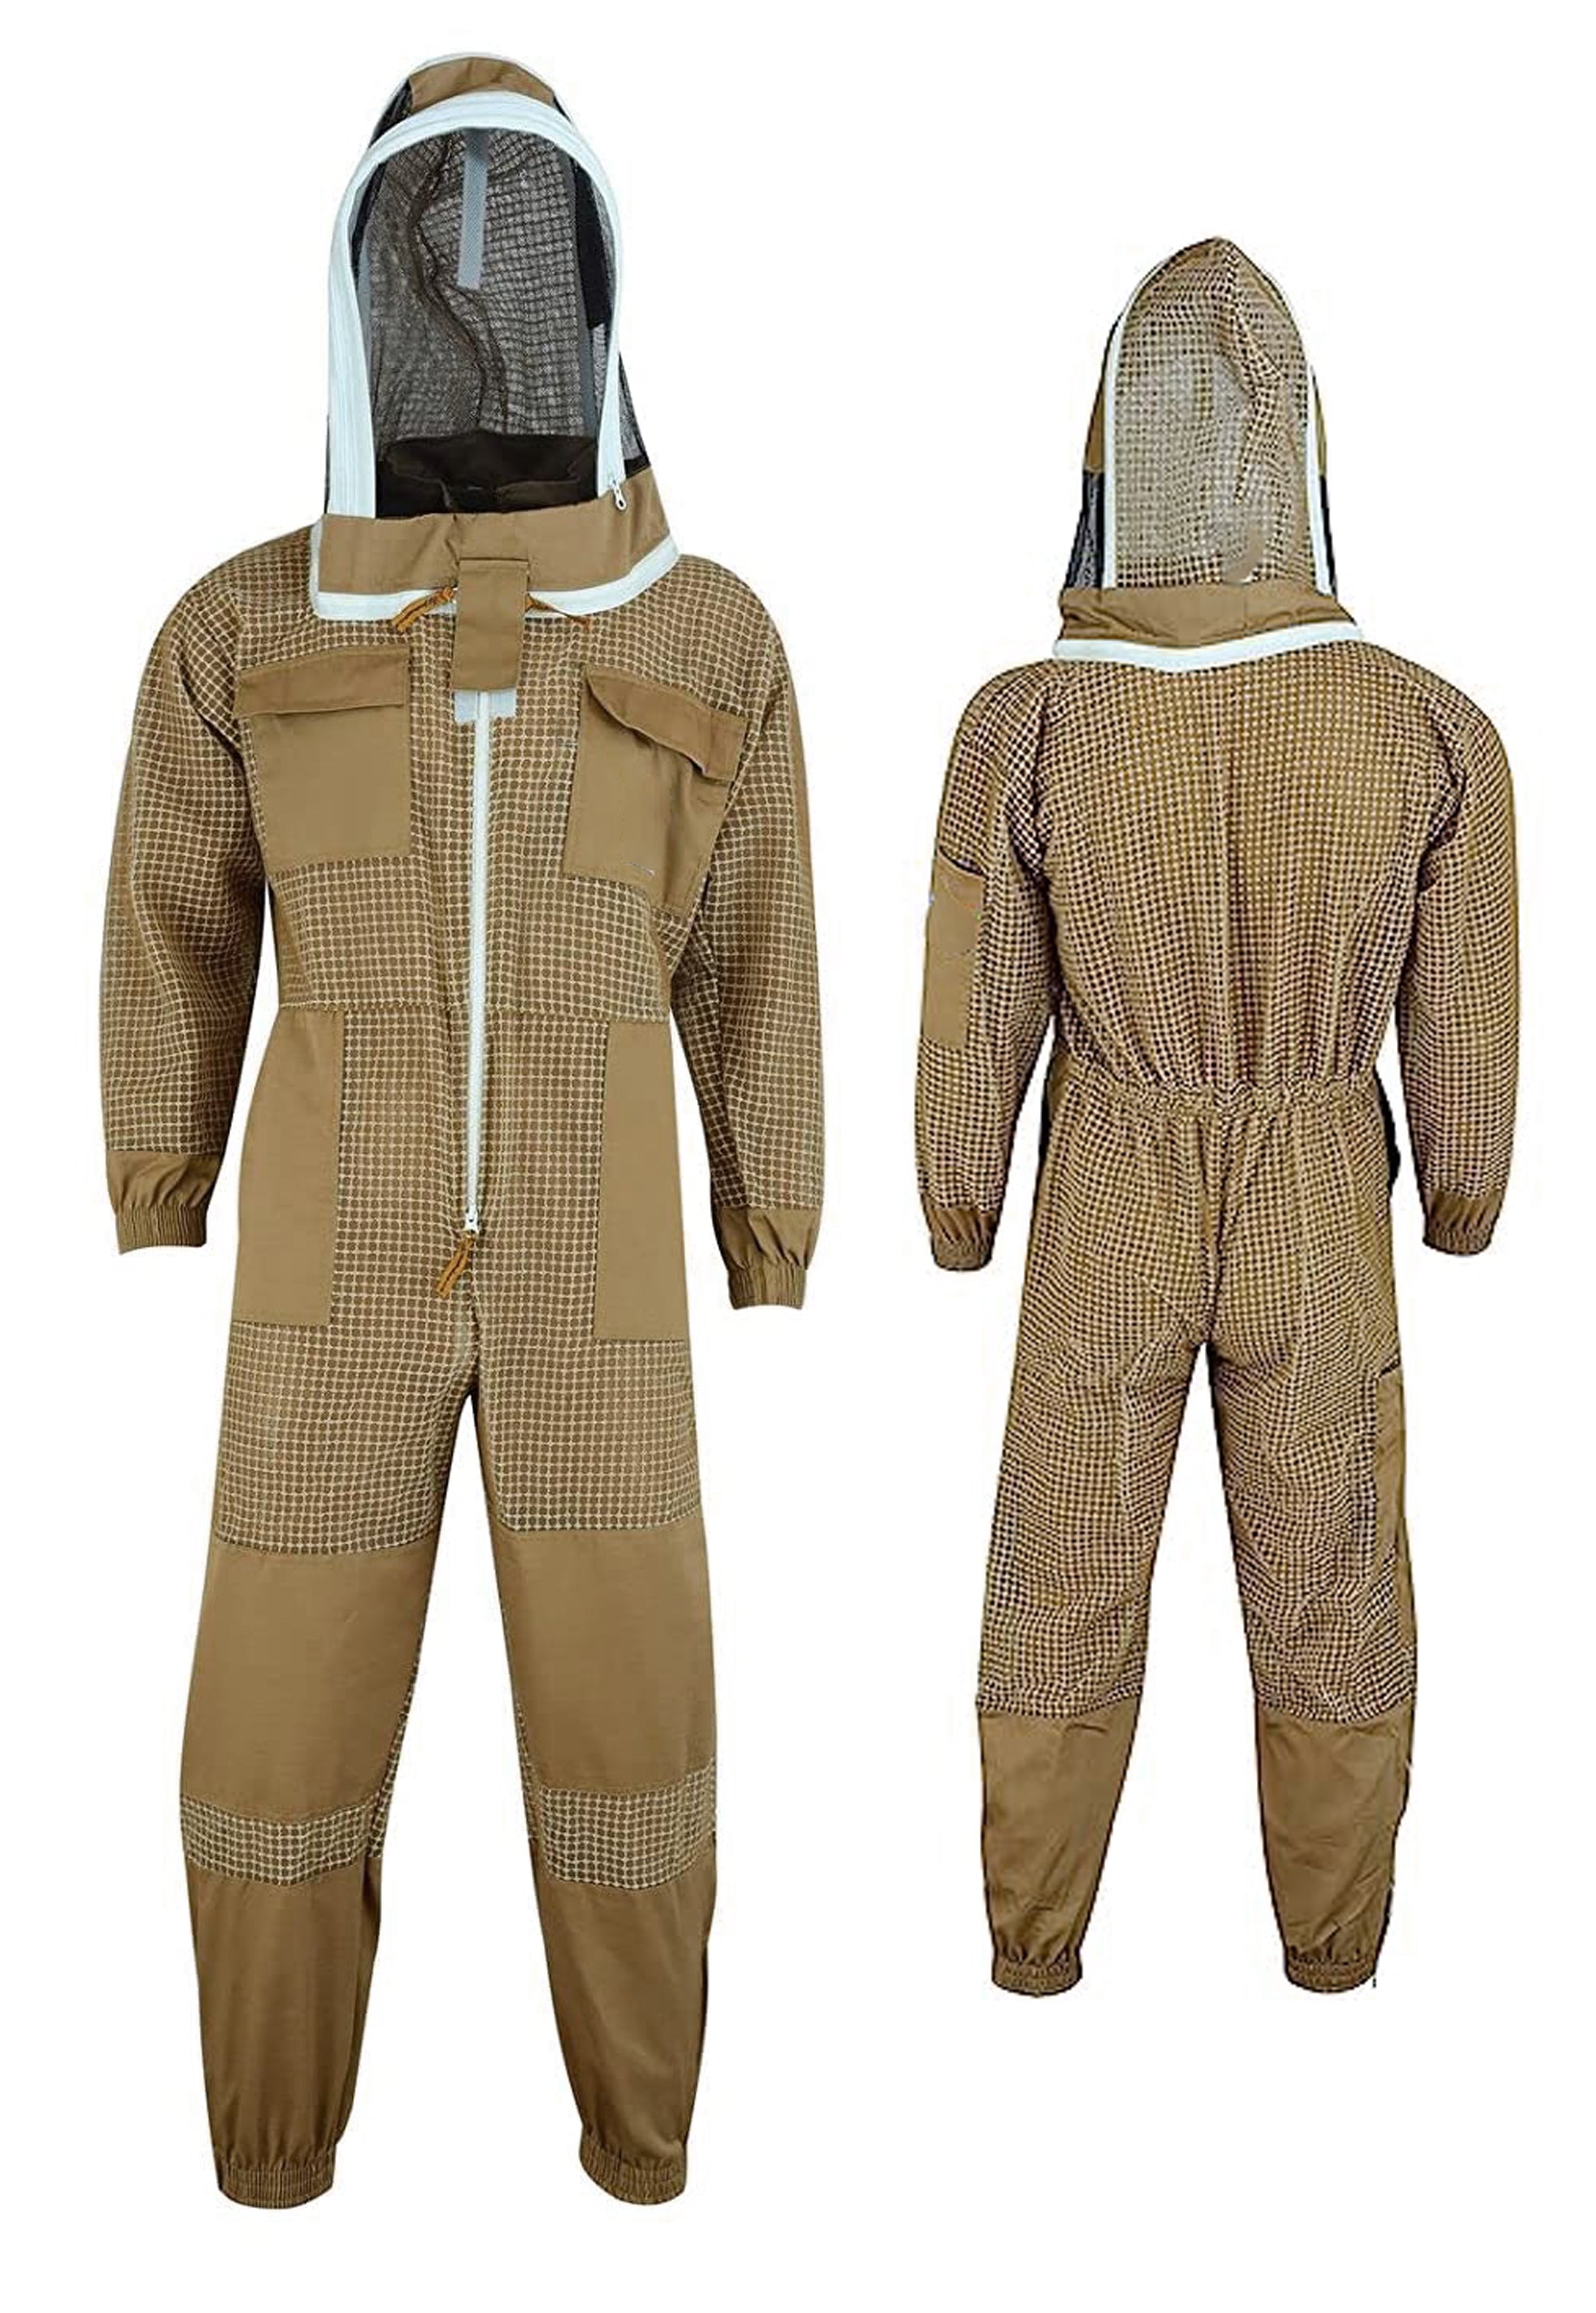 Beehive Suits: Unbeeable😏 with sting free protection [Do not Buy]